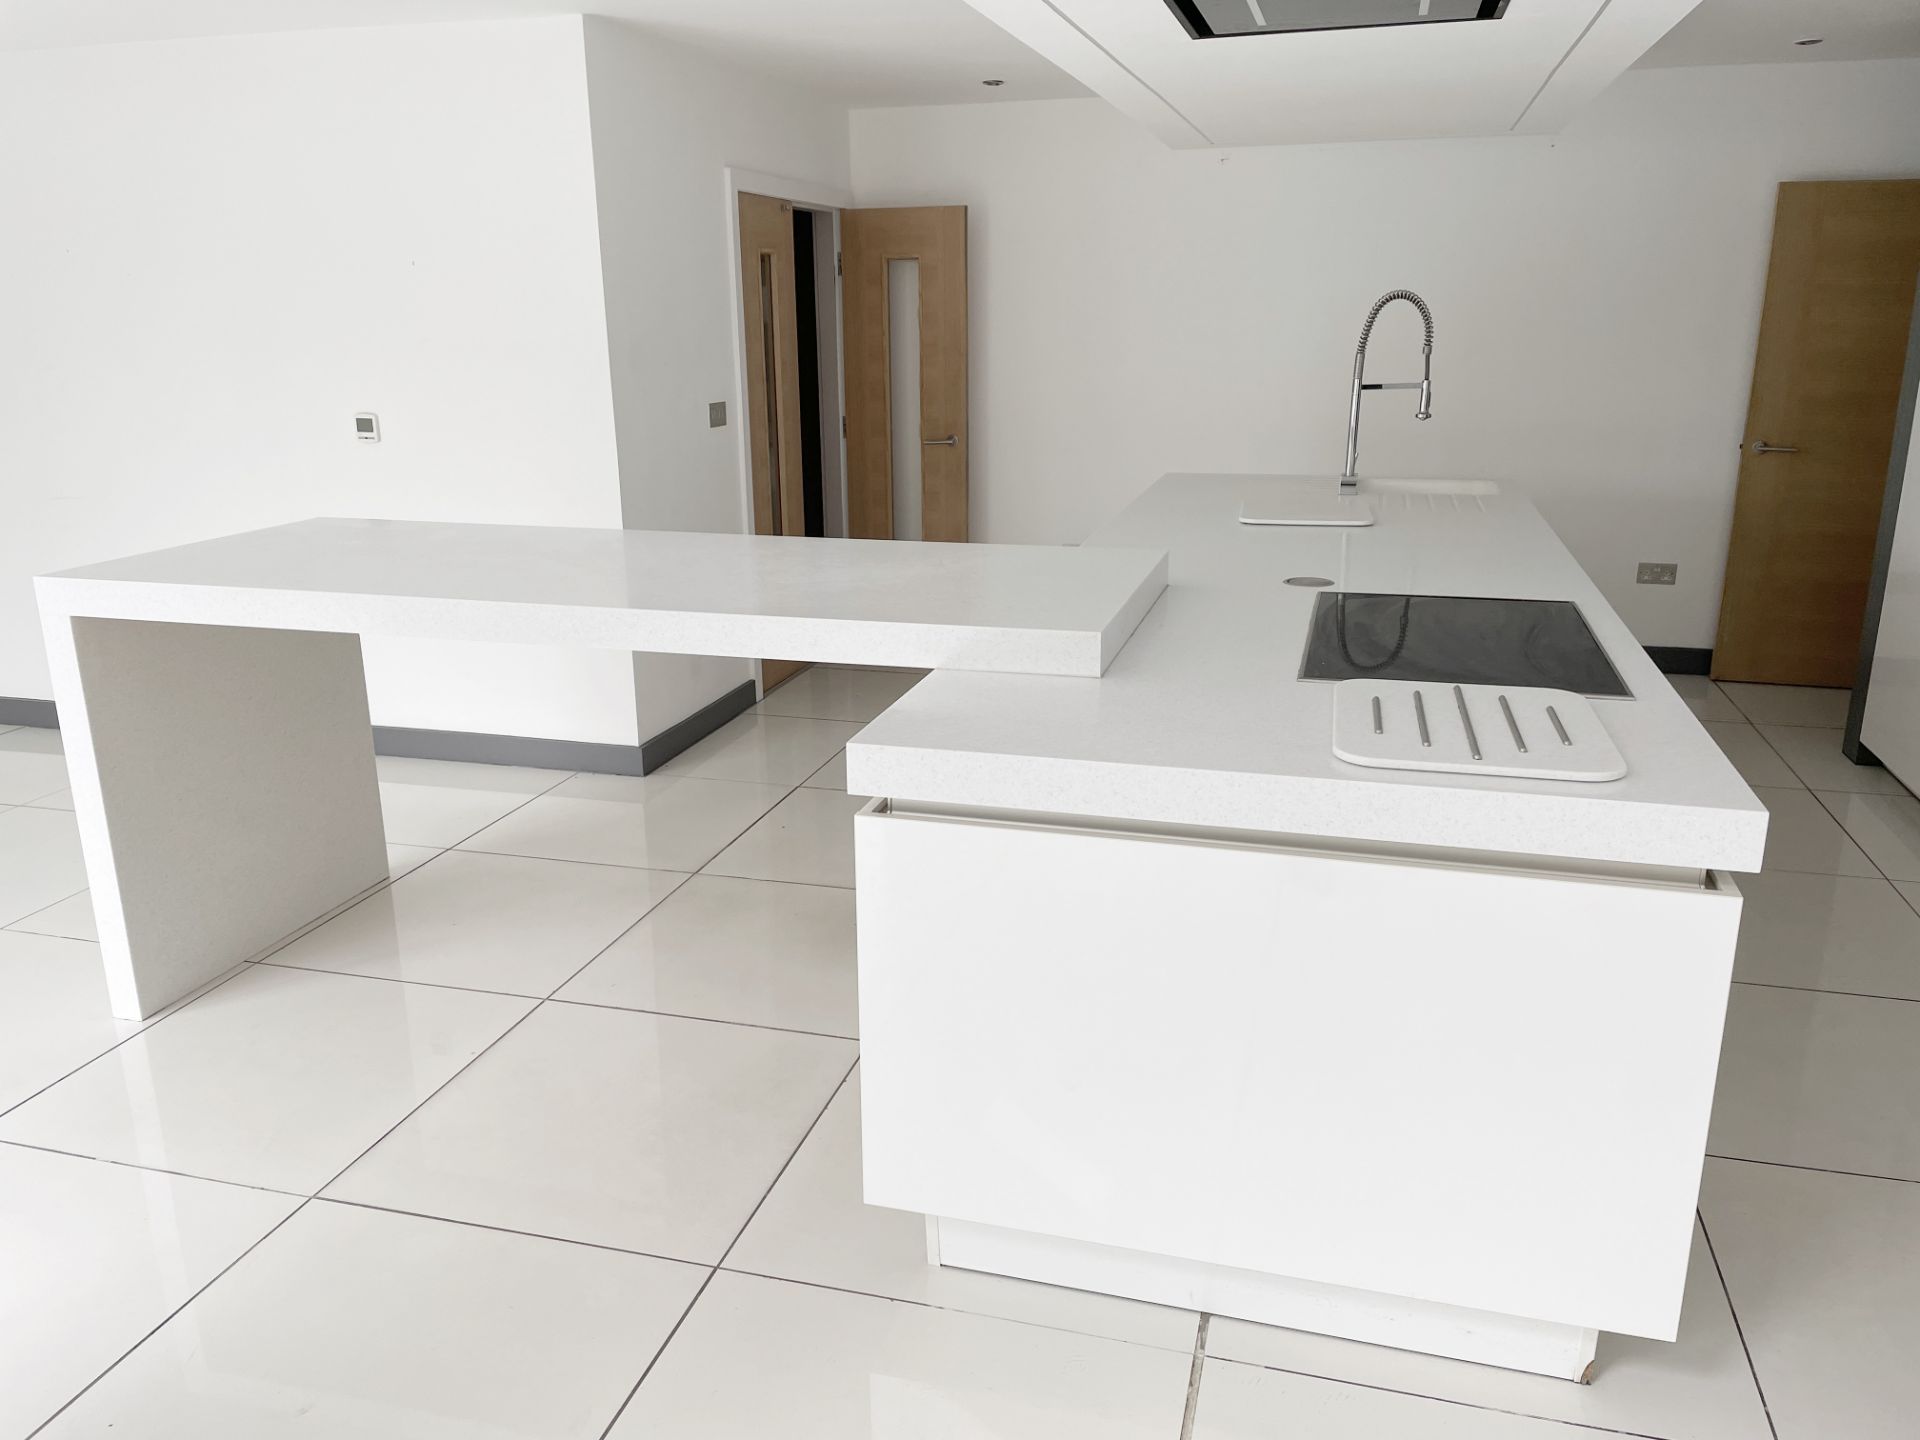 1 x SieMatic Contemporary Fitted Kitchen With Branded Appliances, Central Island + Corian Worktops - Image 4 of 100